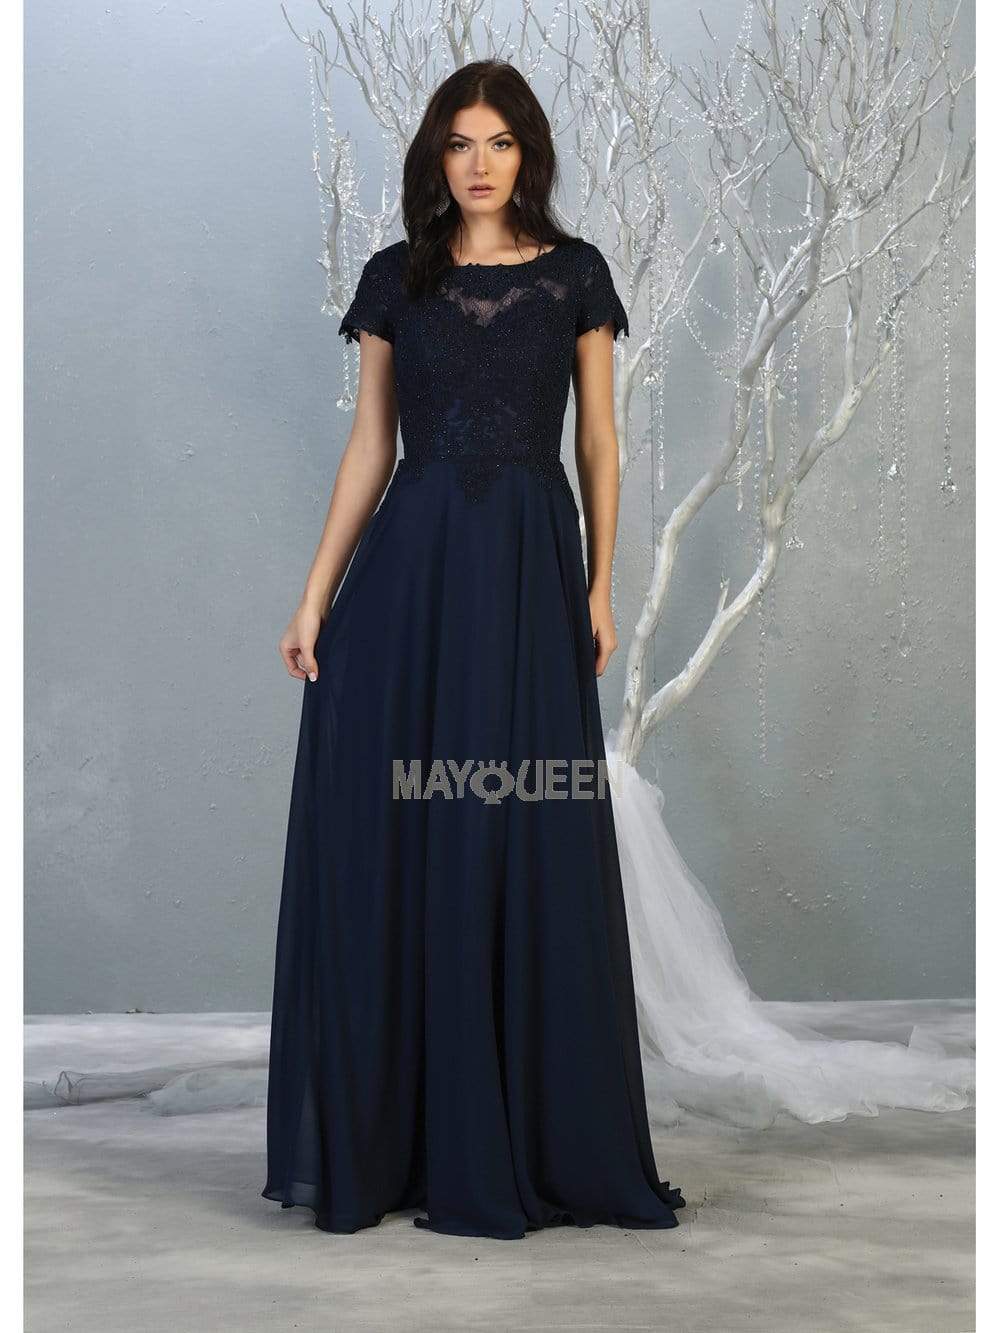 May Queen - MQ1763 Short Sleeve Jeweled Applique A-Line Dress Prom Dresses M / Navy